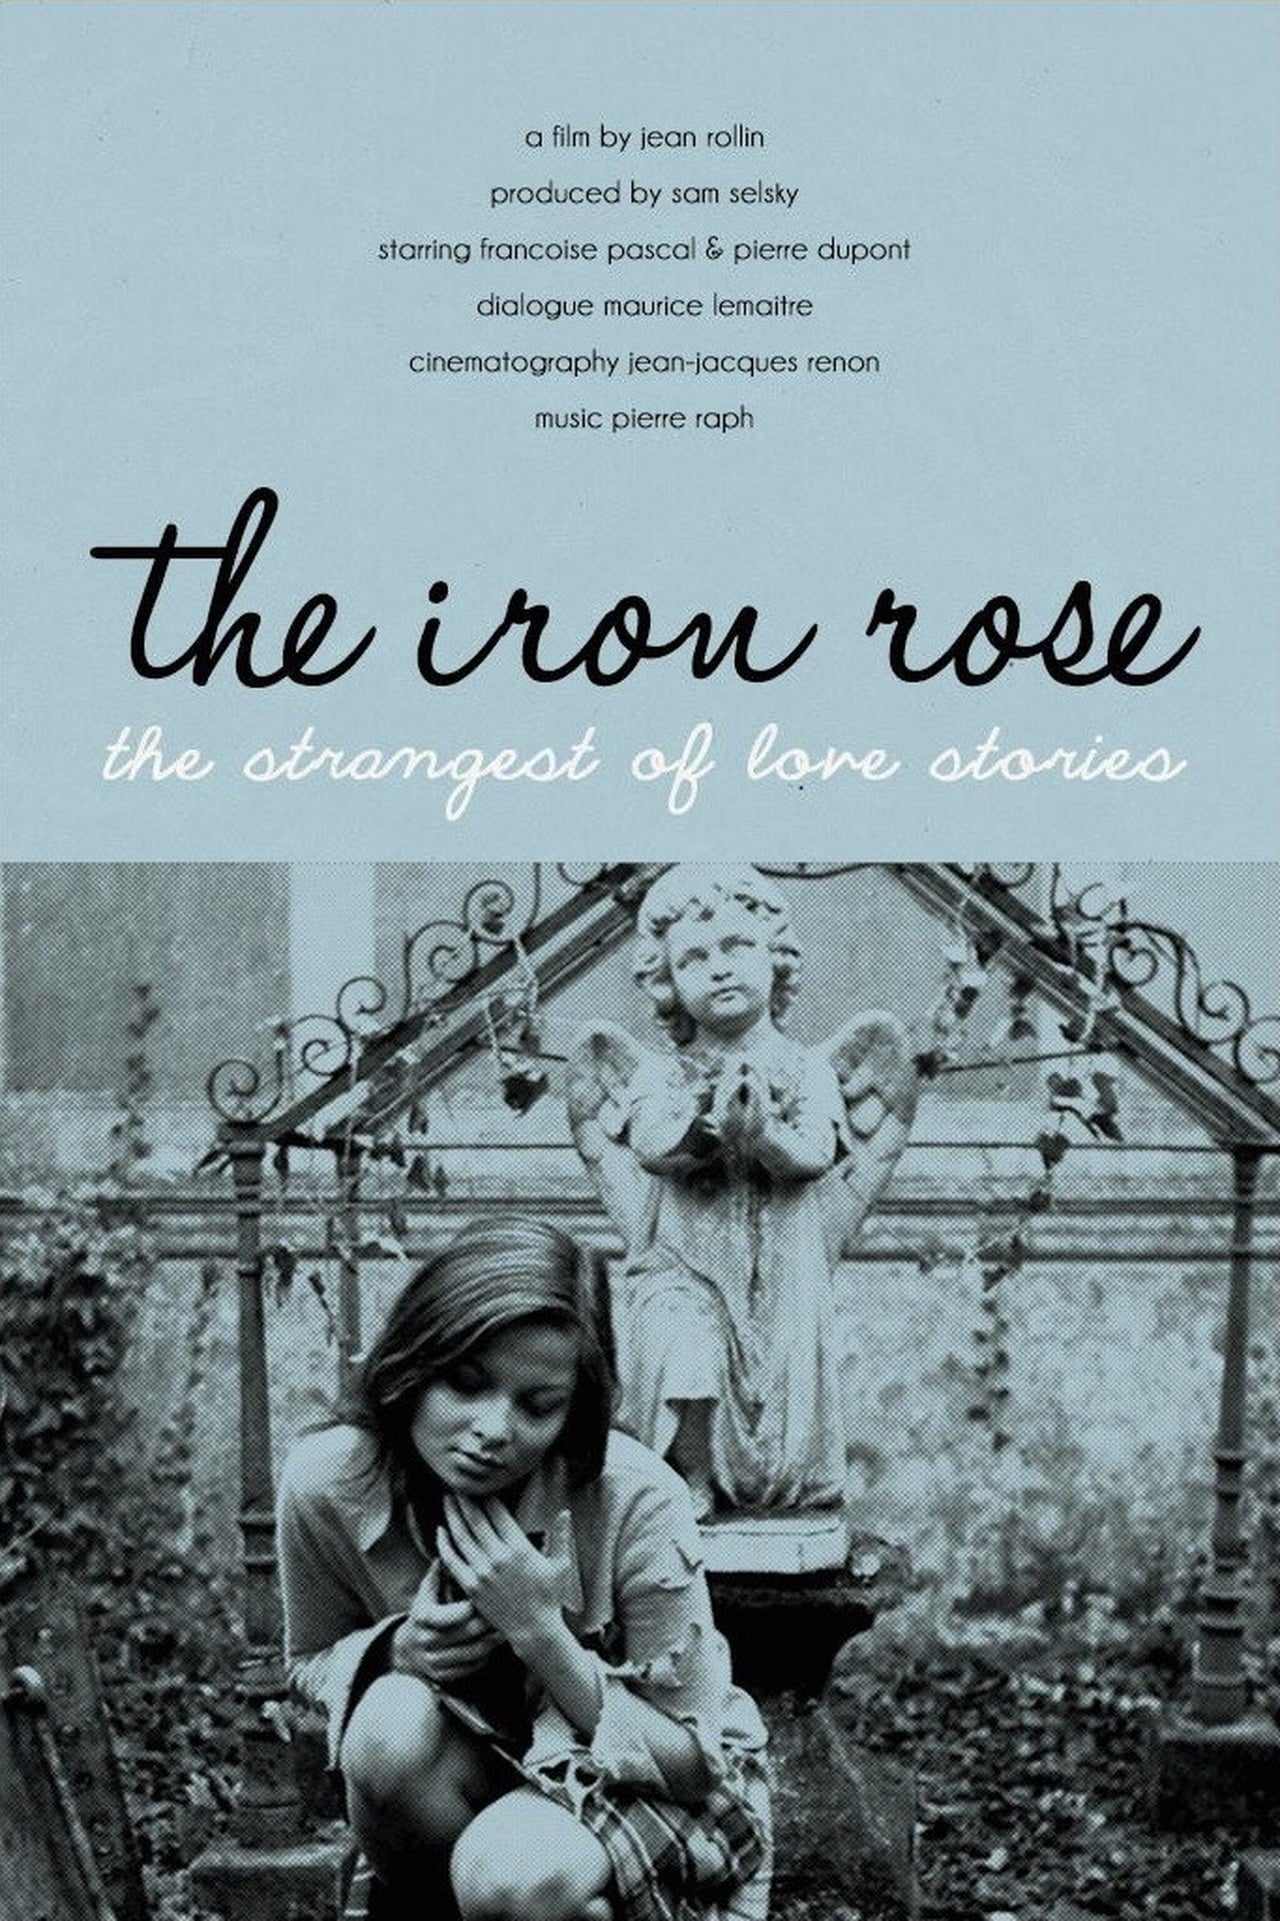 The Iron Rose poster